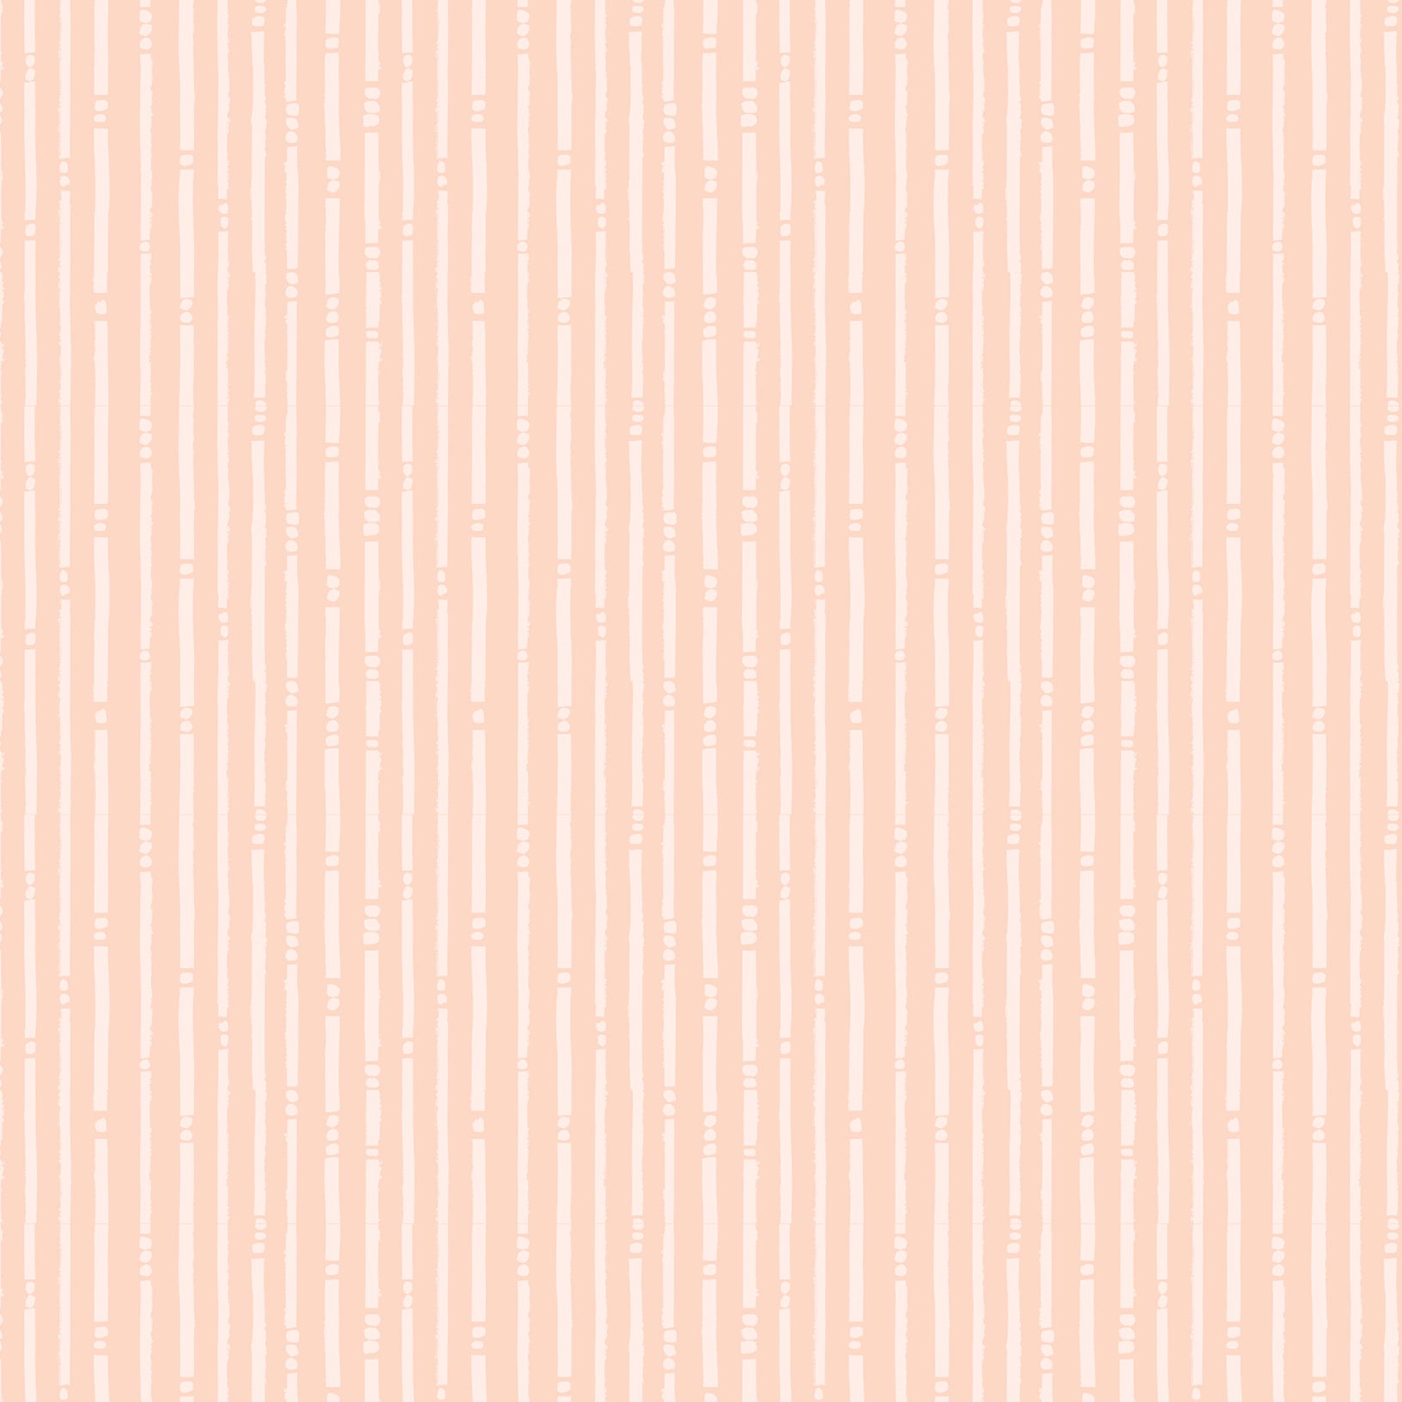 Serenity Blooms, Stripes Peach SR24519, sold by the 1/2 yard, *PREORDER